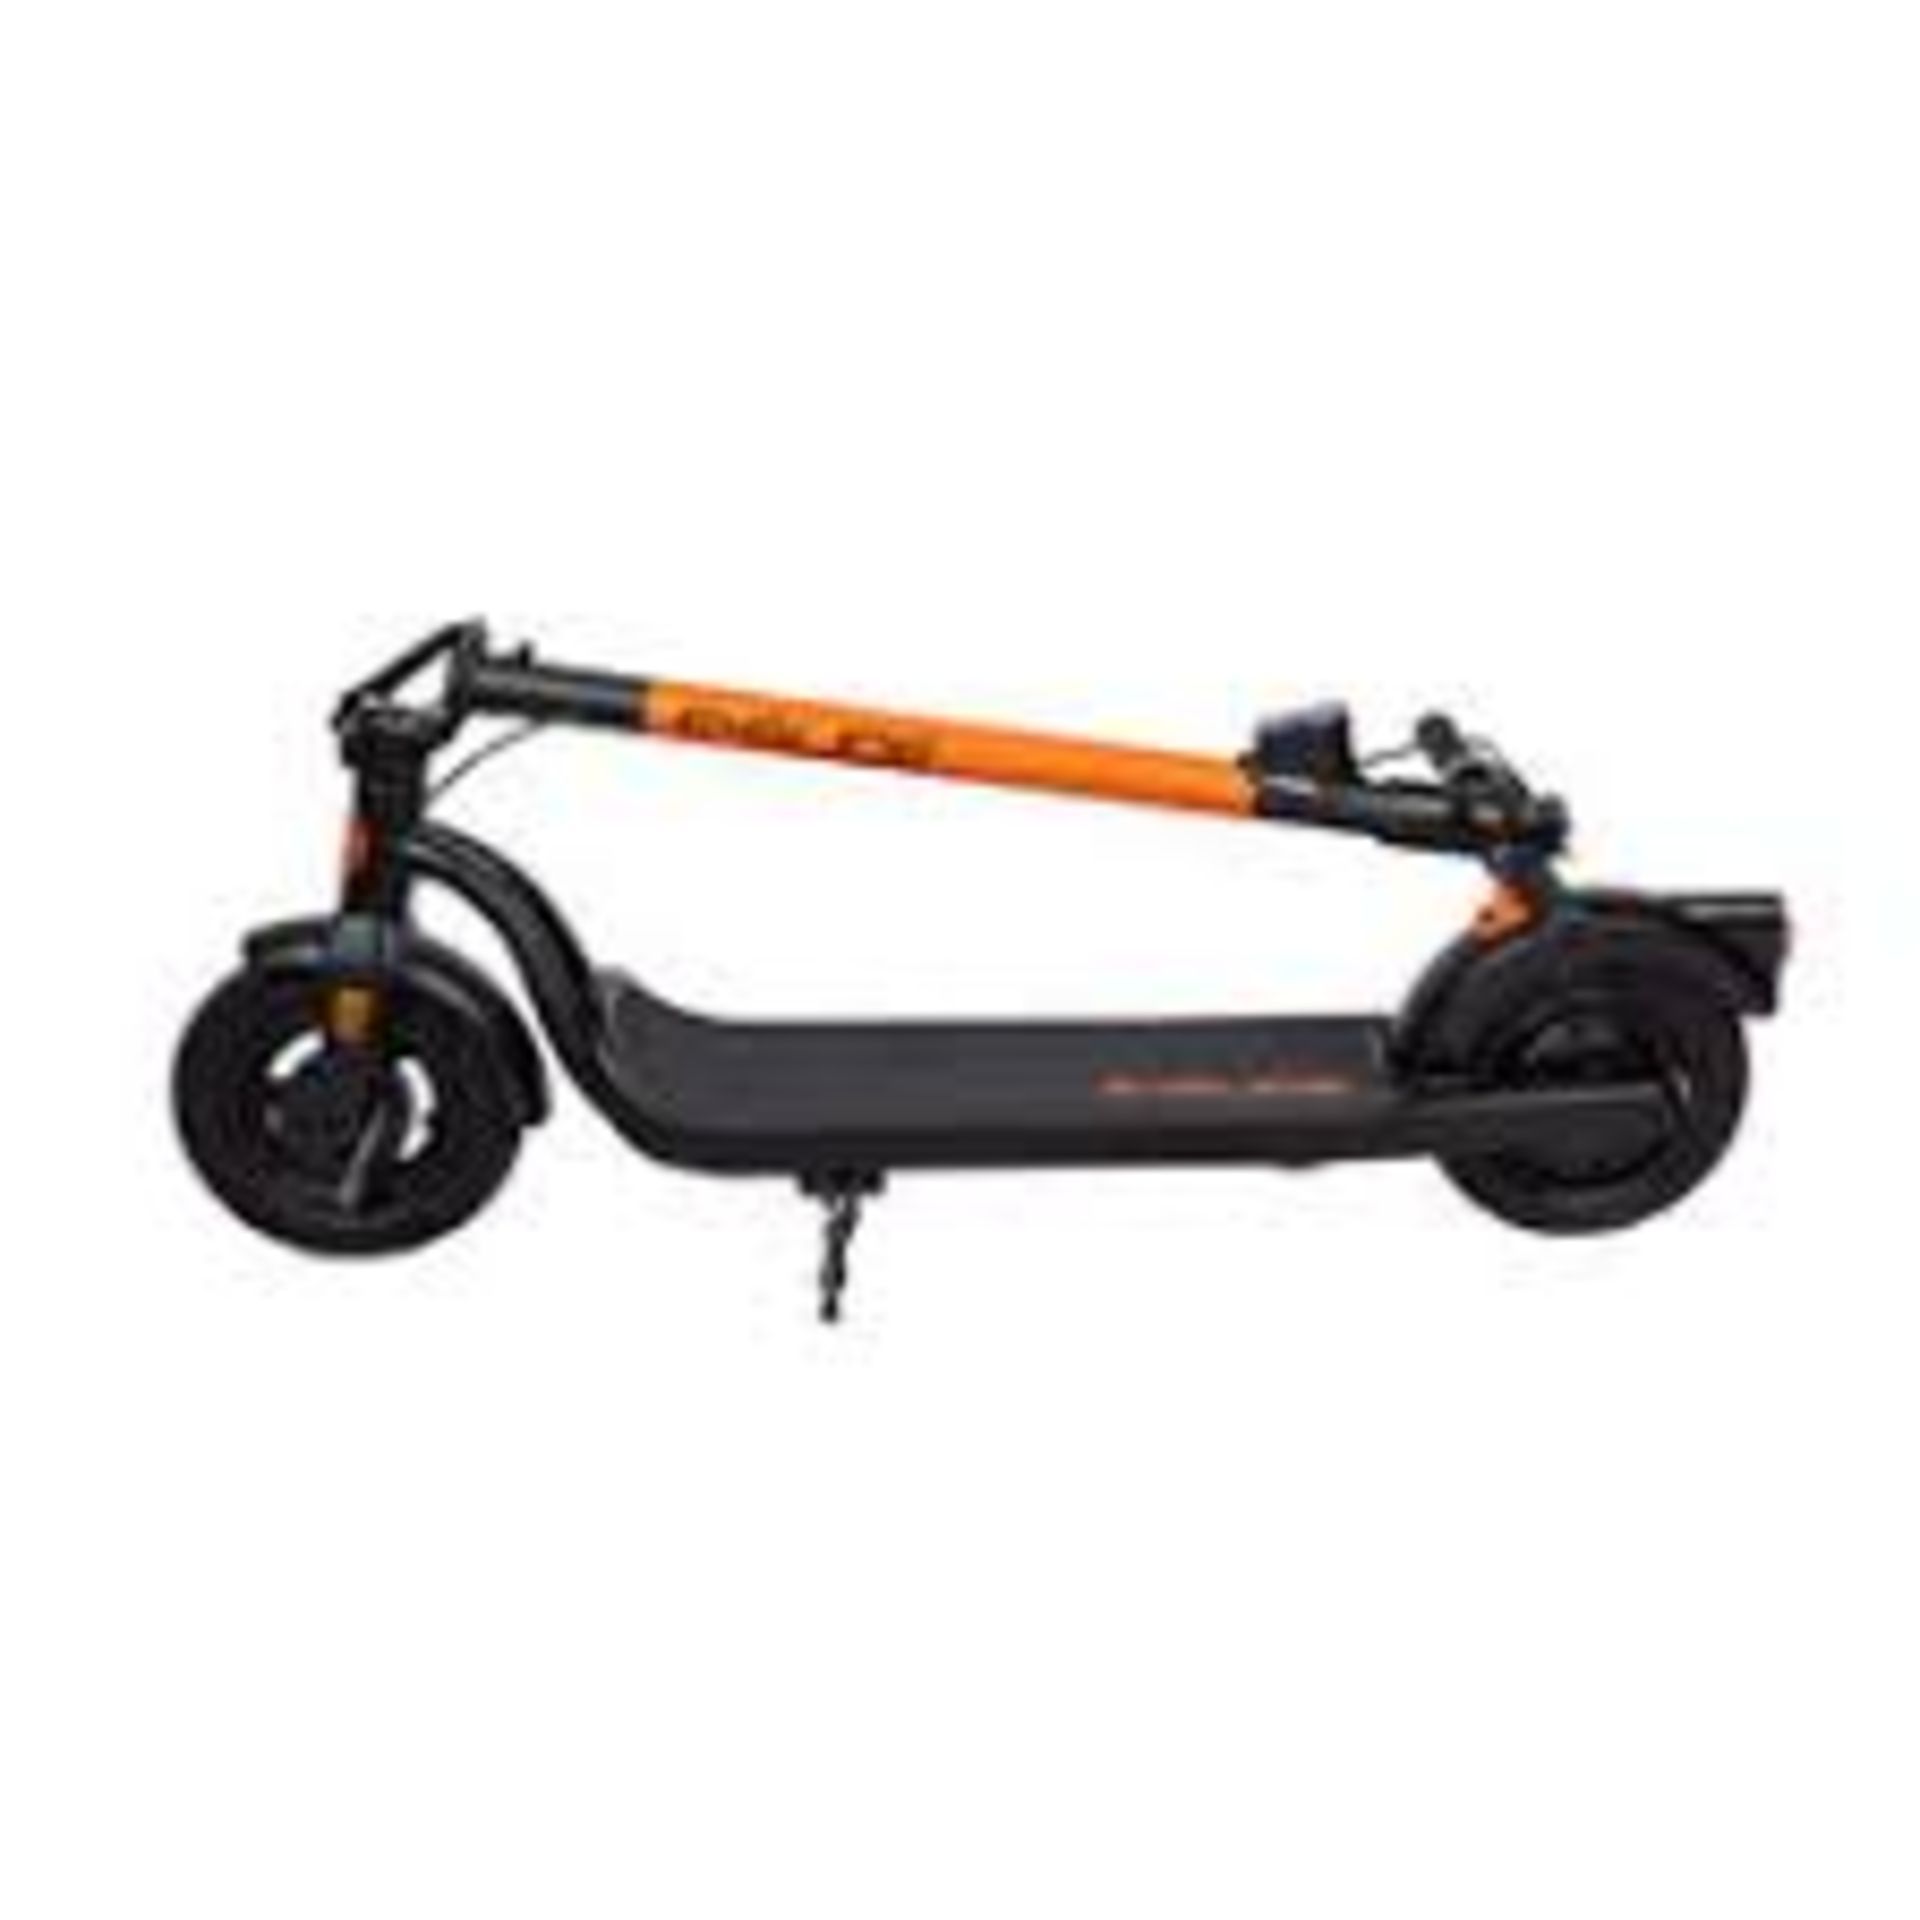 Brand New E-Glide V2 Electric Scooter Orange and Black RRP £599, Introducing a sleek and efficient - Image 2 of 2